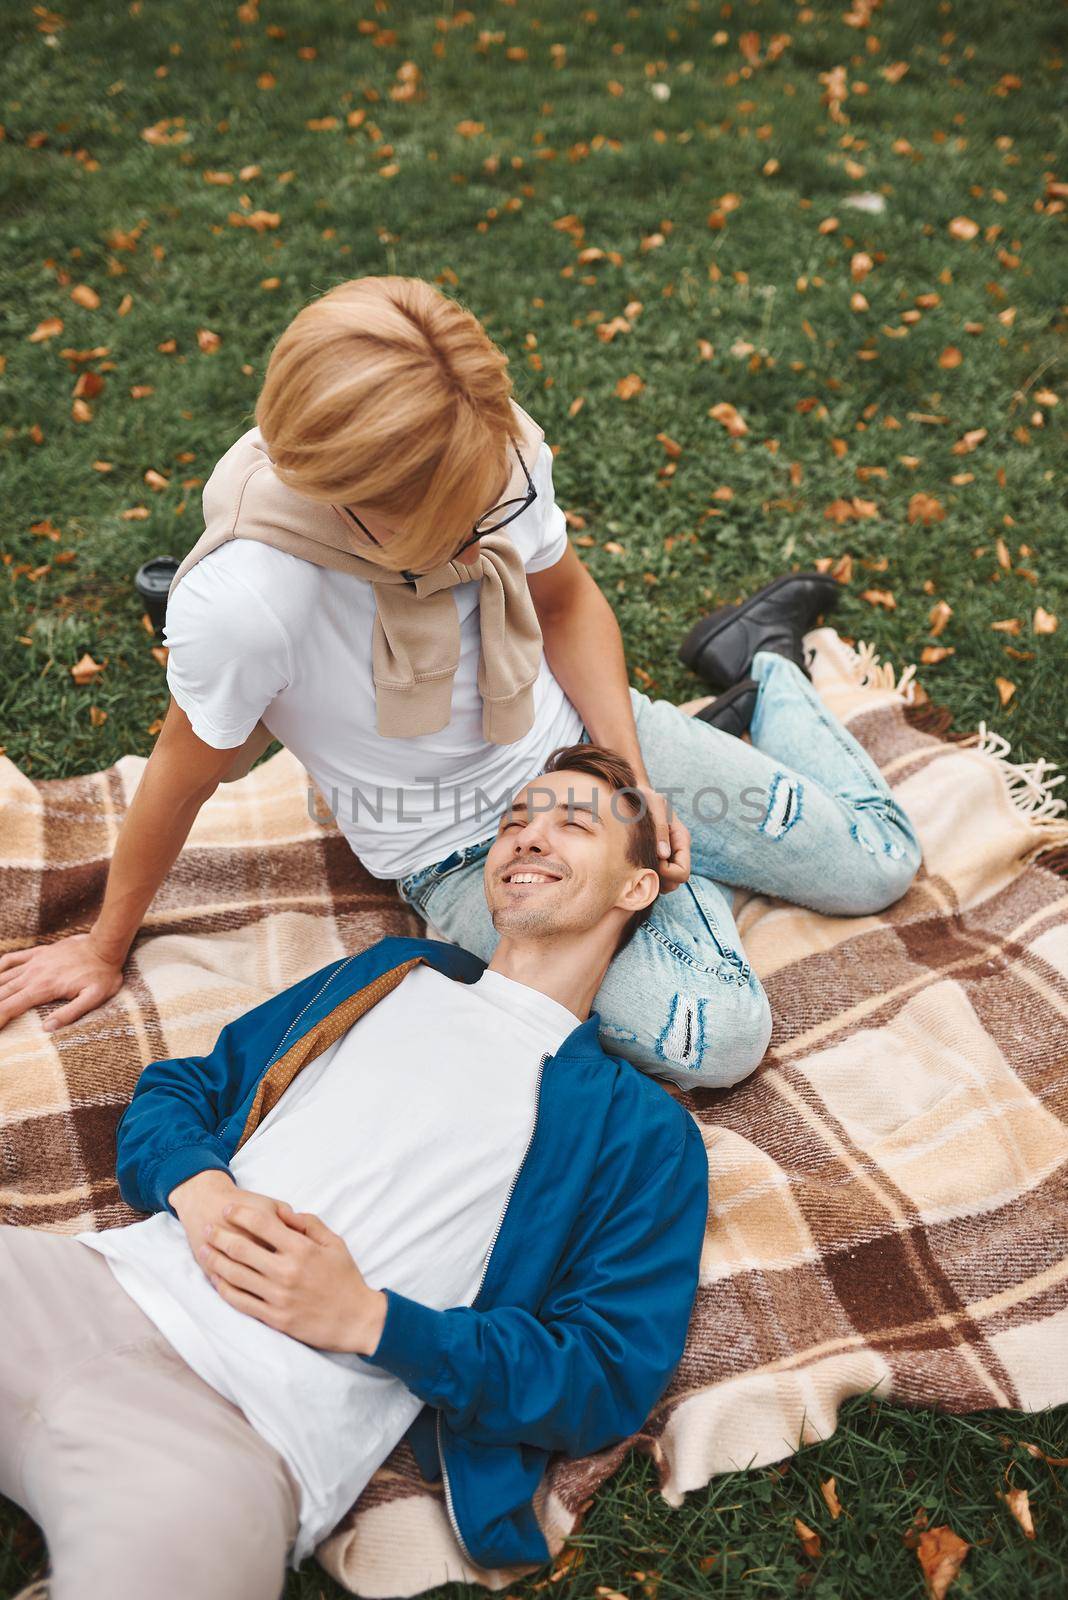 Loving gay couple having romantic date outdoors. Two handsome men sitting together on blanket in park. LGBT concept.